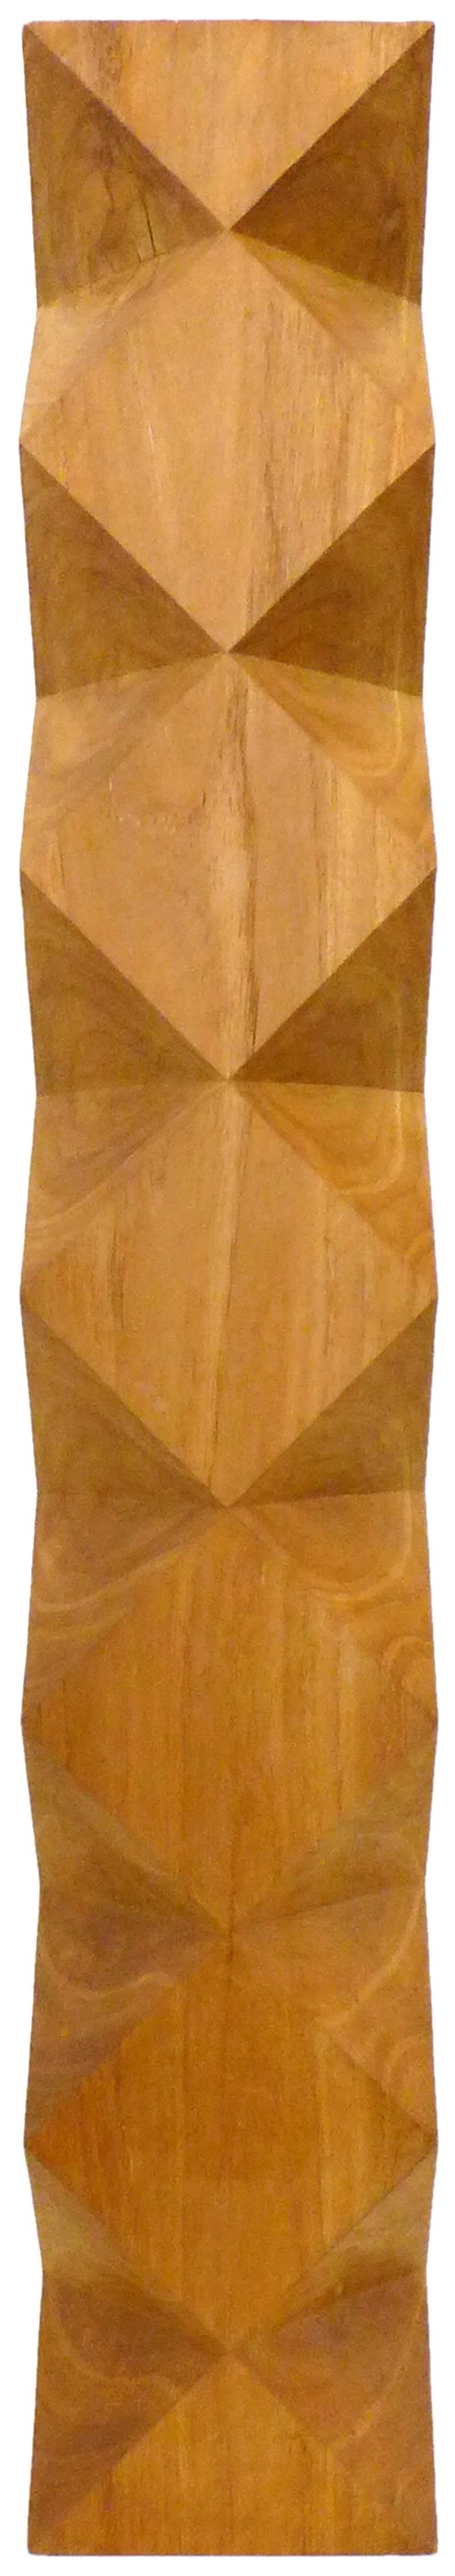 An extraordinary, chip-carved, wood totem by contemporary American artist Aleph Geddis. A beautifully executed, multifaceted form of impressive scale and exact detail. Soaked in sacred geometry; great from all angles; an impressive and powerful